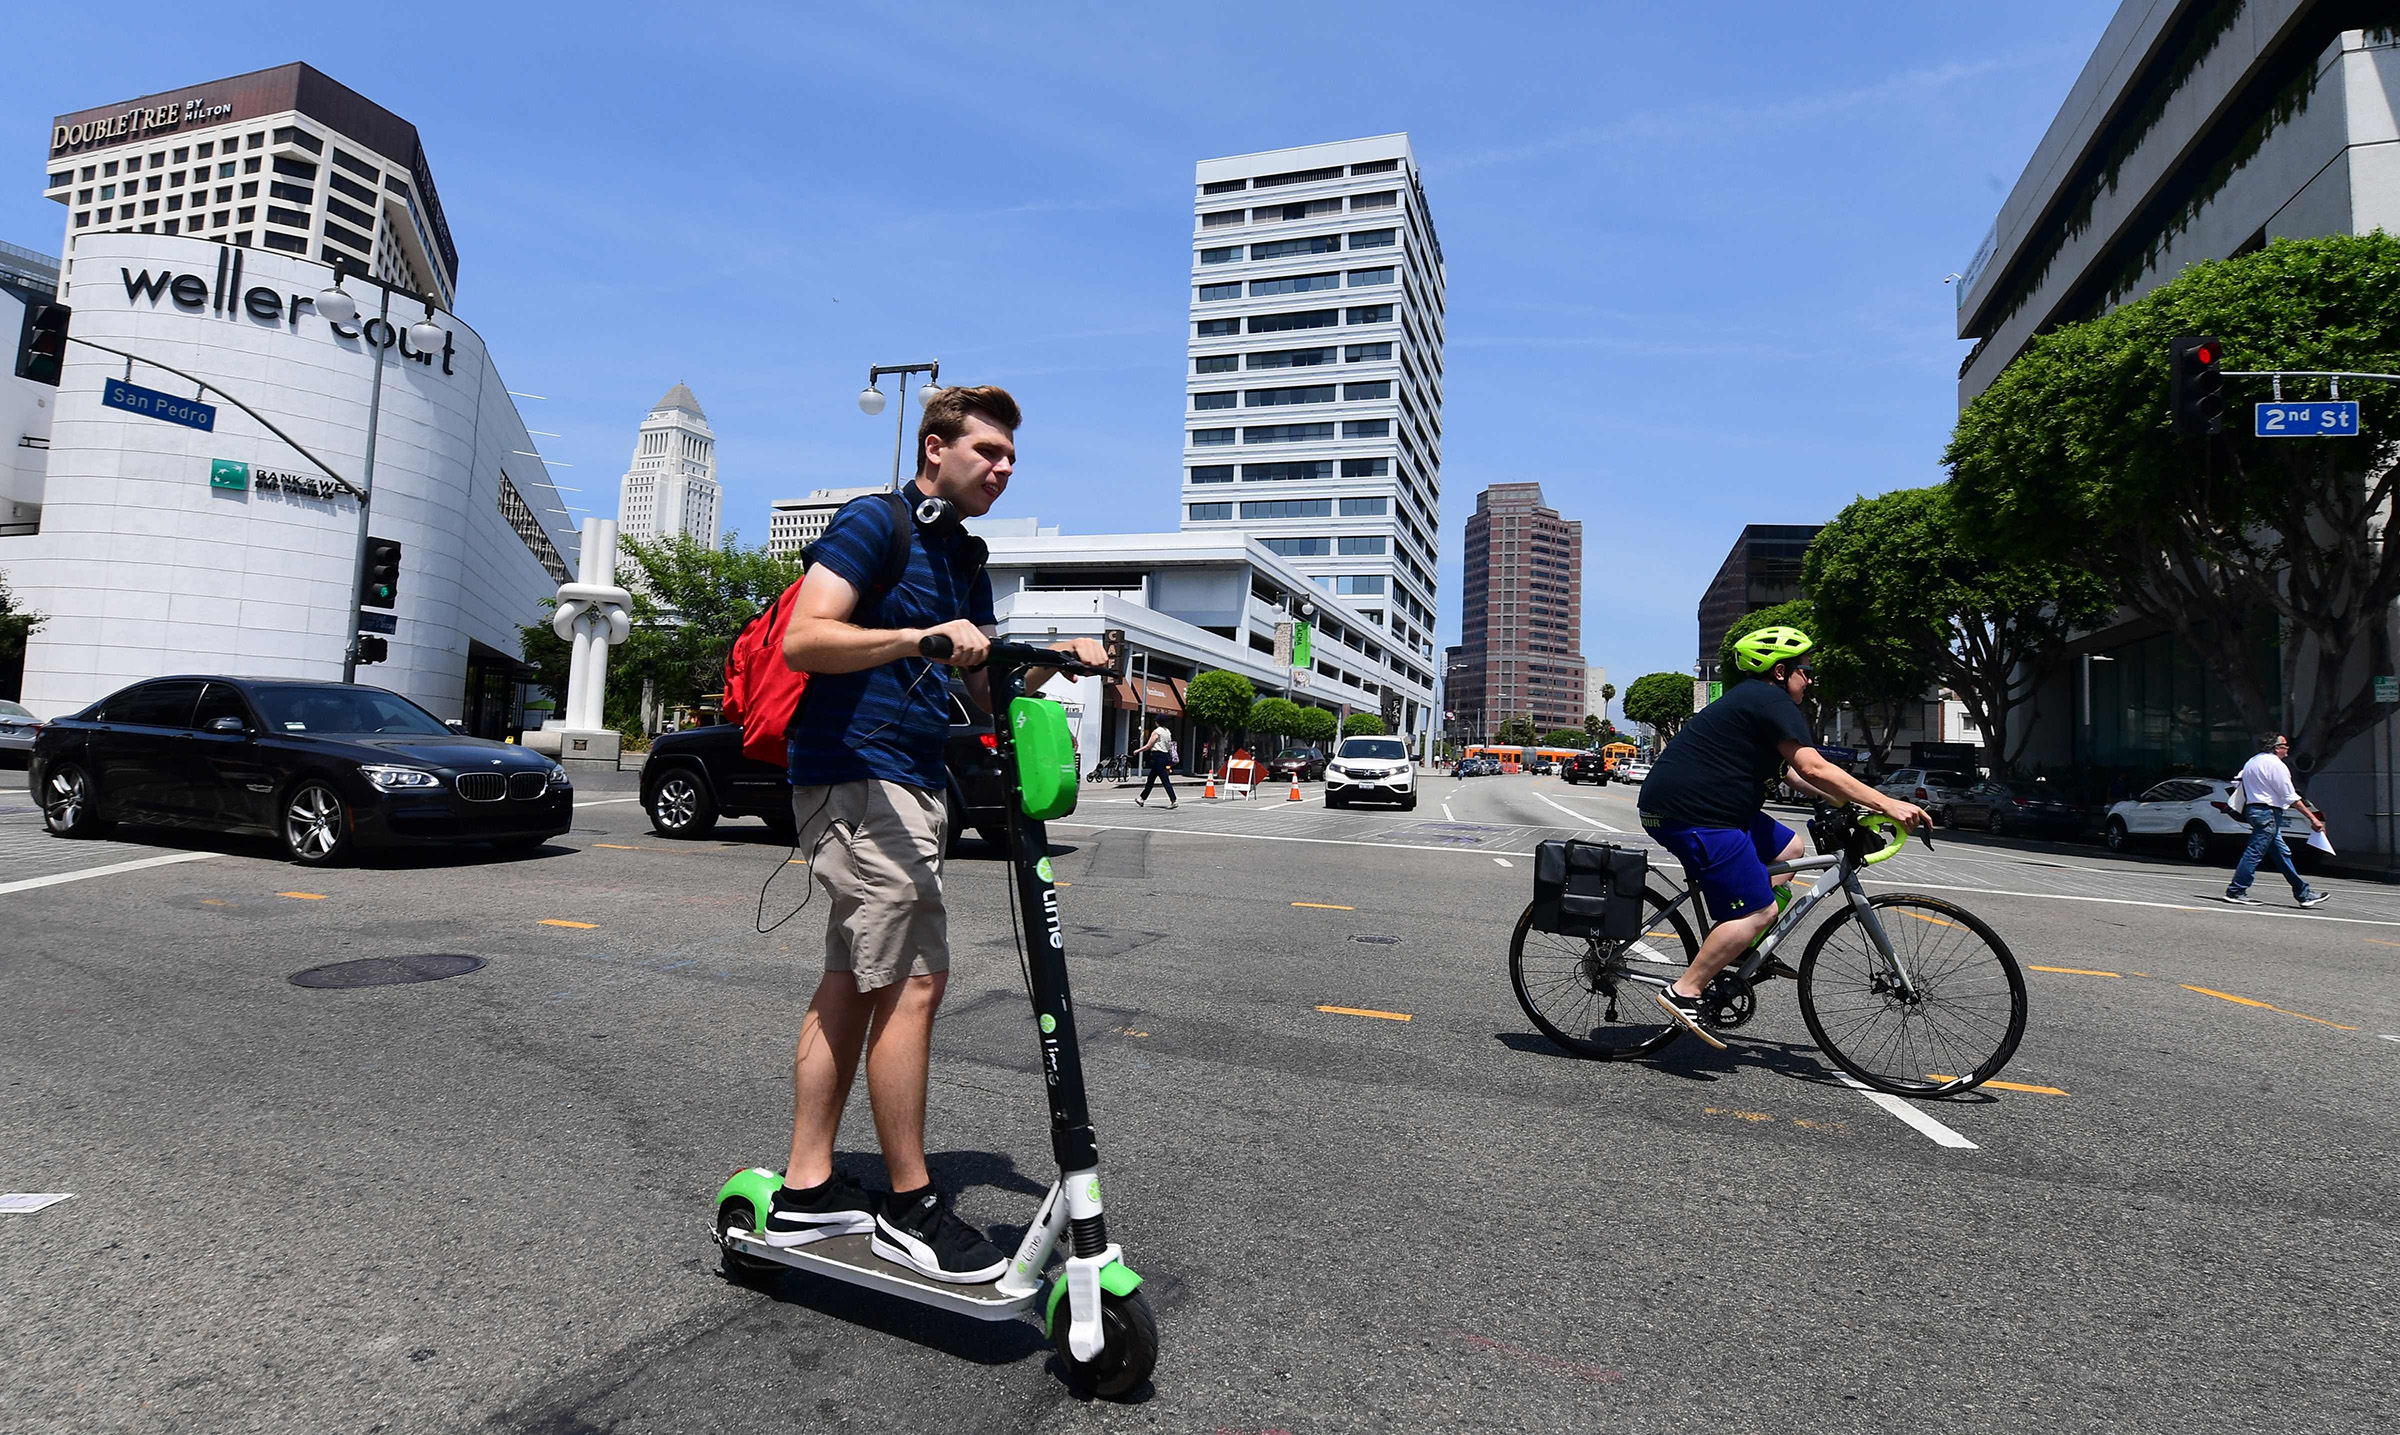 A commuter rides an e-scooter across a Los Angeles street on August 22, 2019, where an e-scooter enforcement task force has been launched in an effort to ensure riders follow the laws. (Frederic J. Brown—AFP/Getty Images)